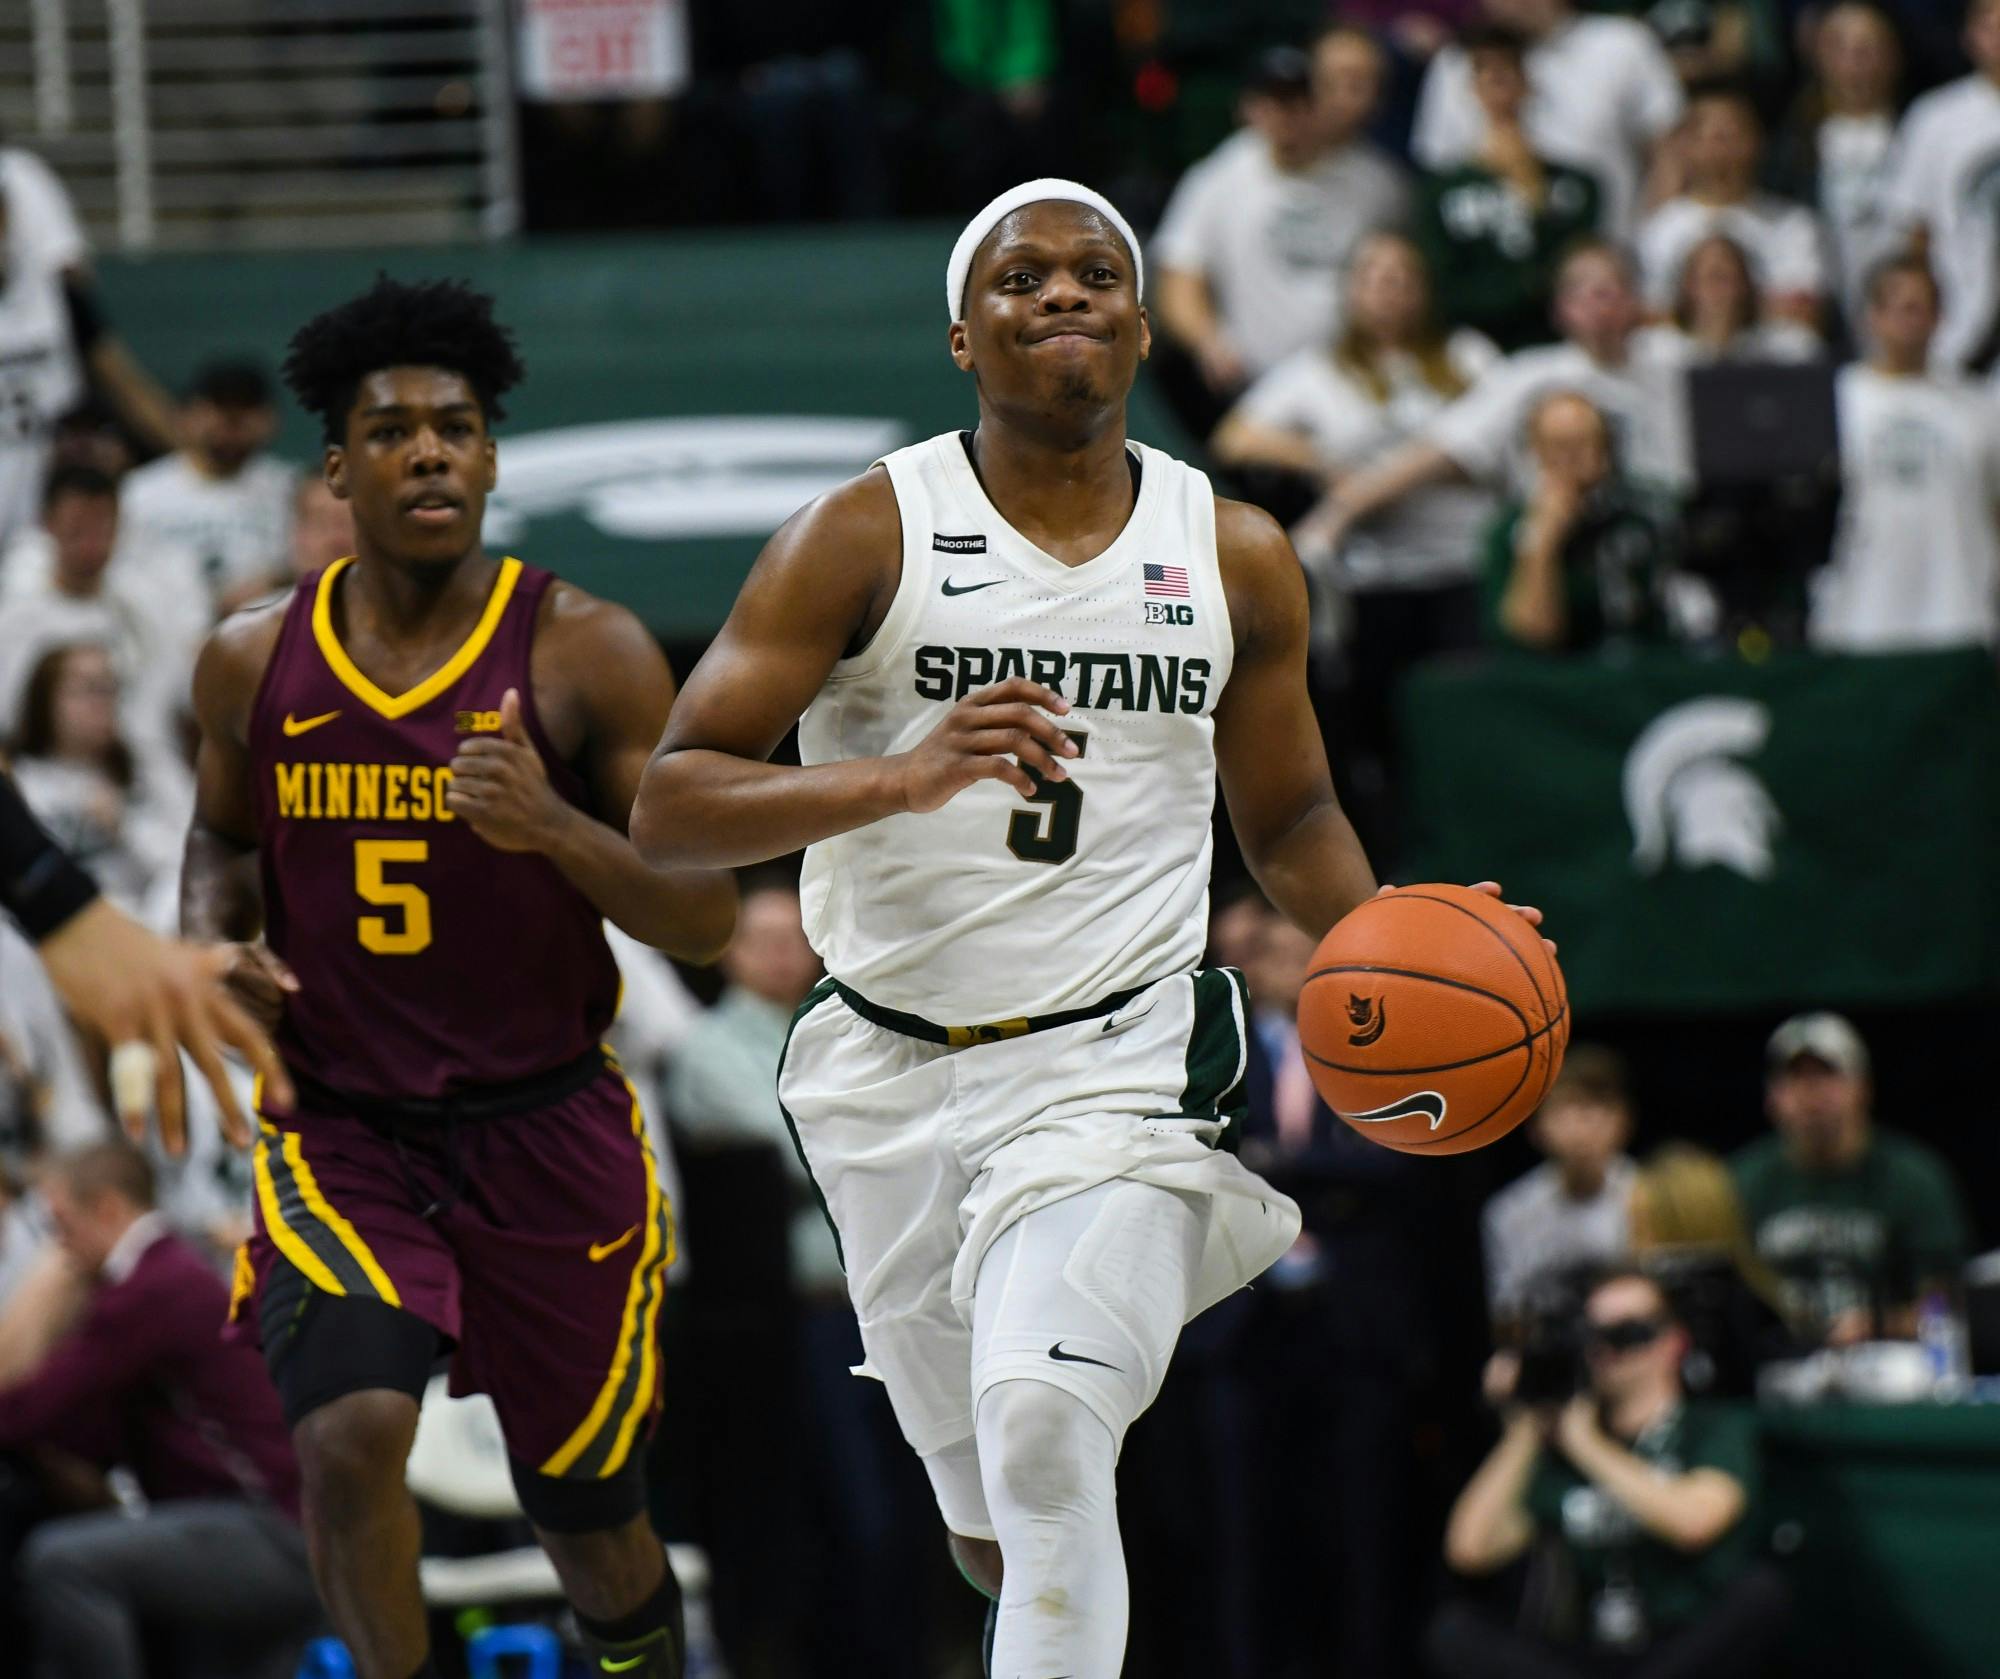 <p>Senior guard Cassius Winston smiles during the game against Minnesota on Jan. 9, 2020 at the Breslin Center. The Spartans defeated the Golden Gophers, 74-58.</p>